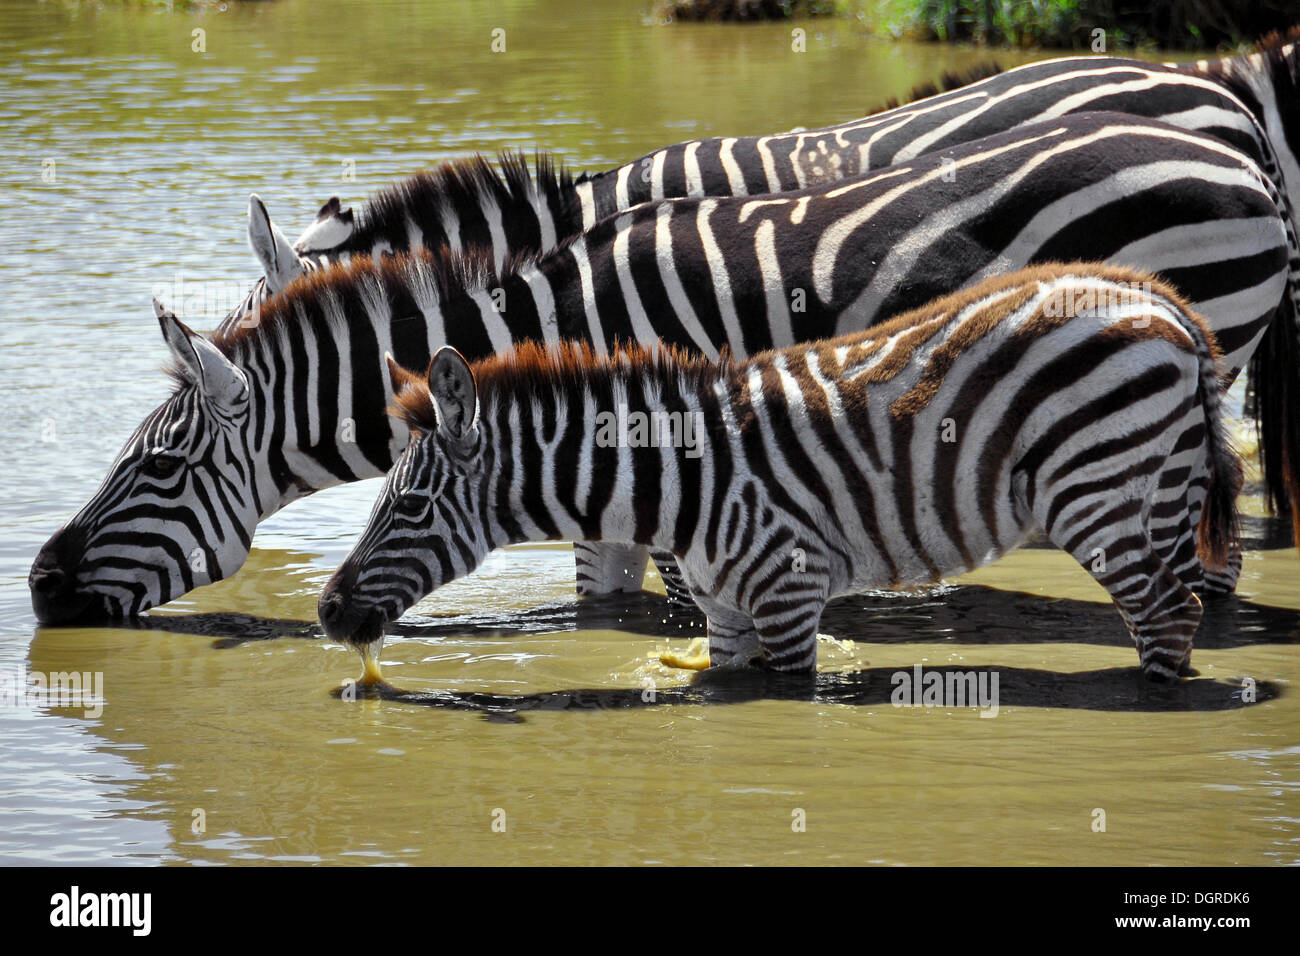 Zebras (Equus quagga) with young, drinking at a watering hole, Serengeti, Tanzania, Africa Stock Photo